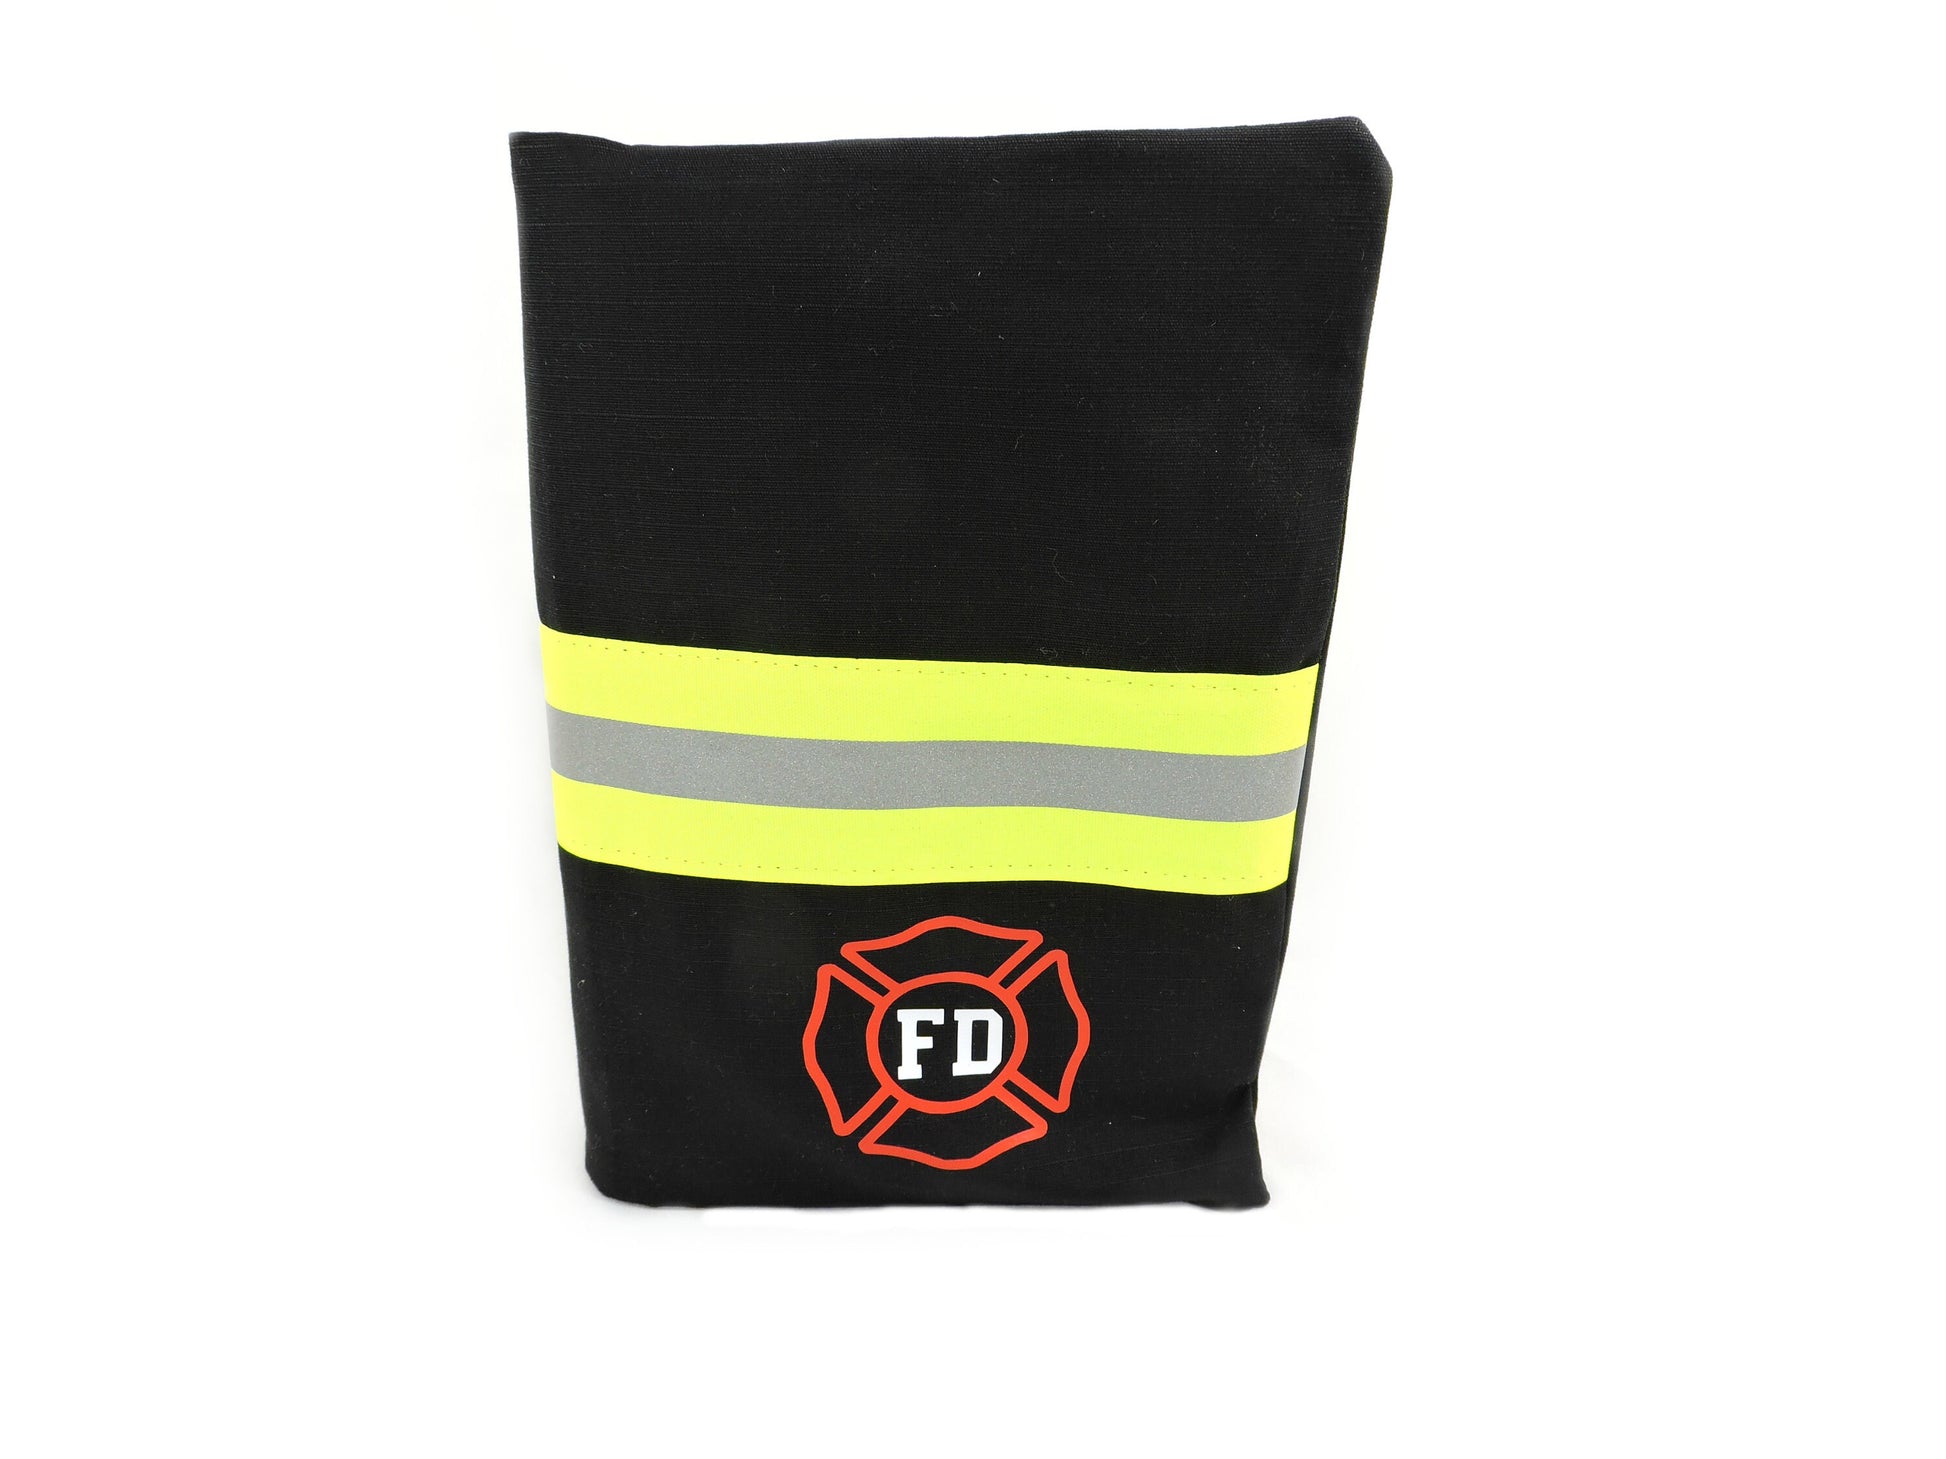 black fabric neon yellow reflective tape Firefighter bible cover